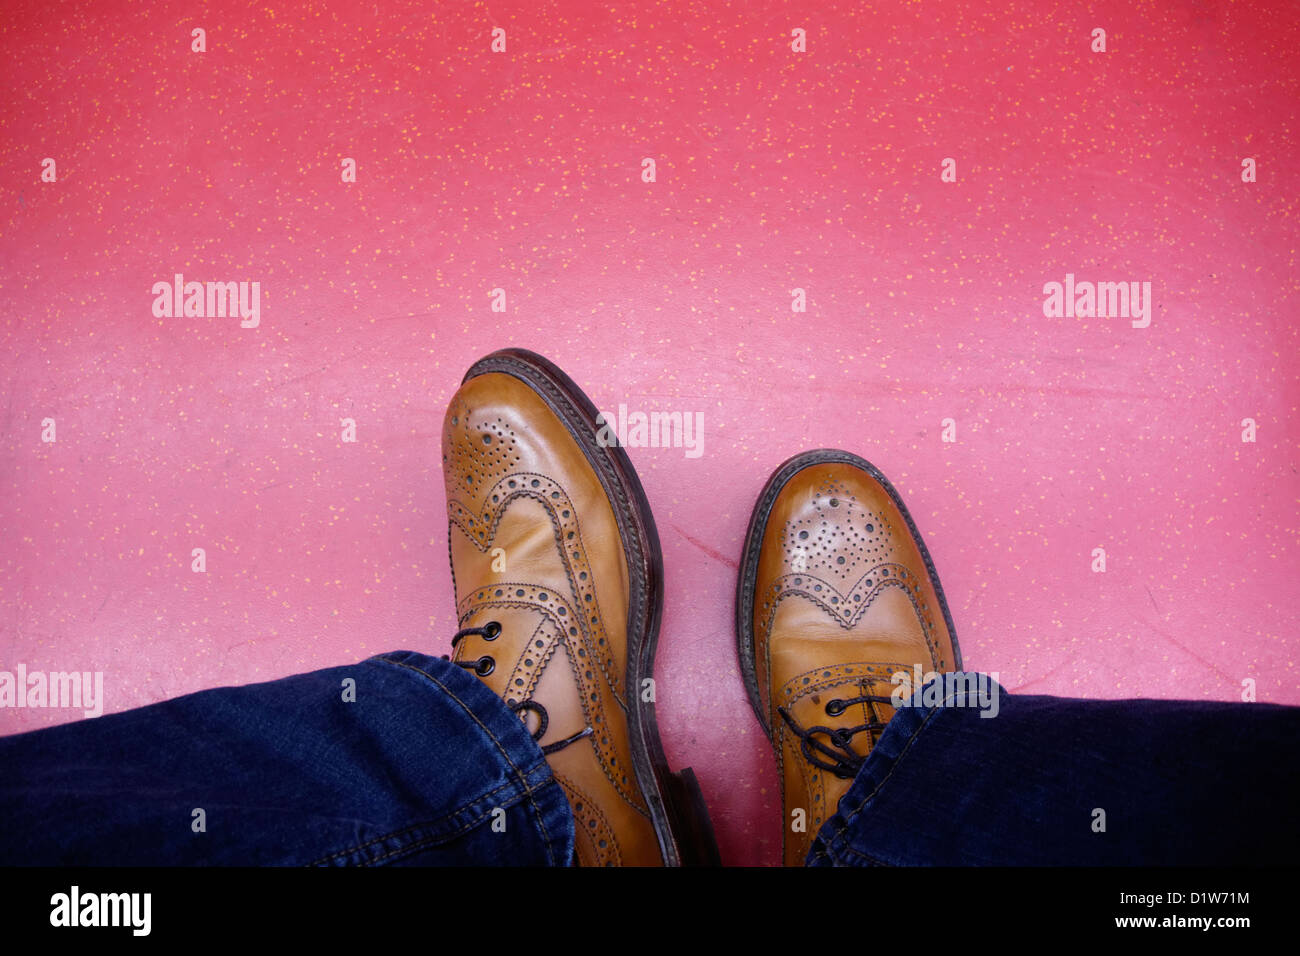 shoes man dress jeans wingtip oxford tan leather 'looking down' step concept mens Stock Photo